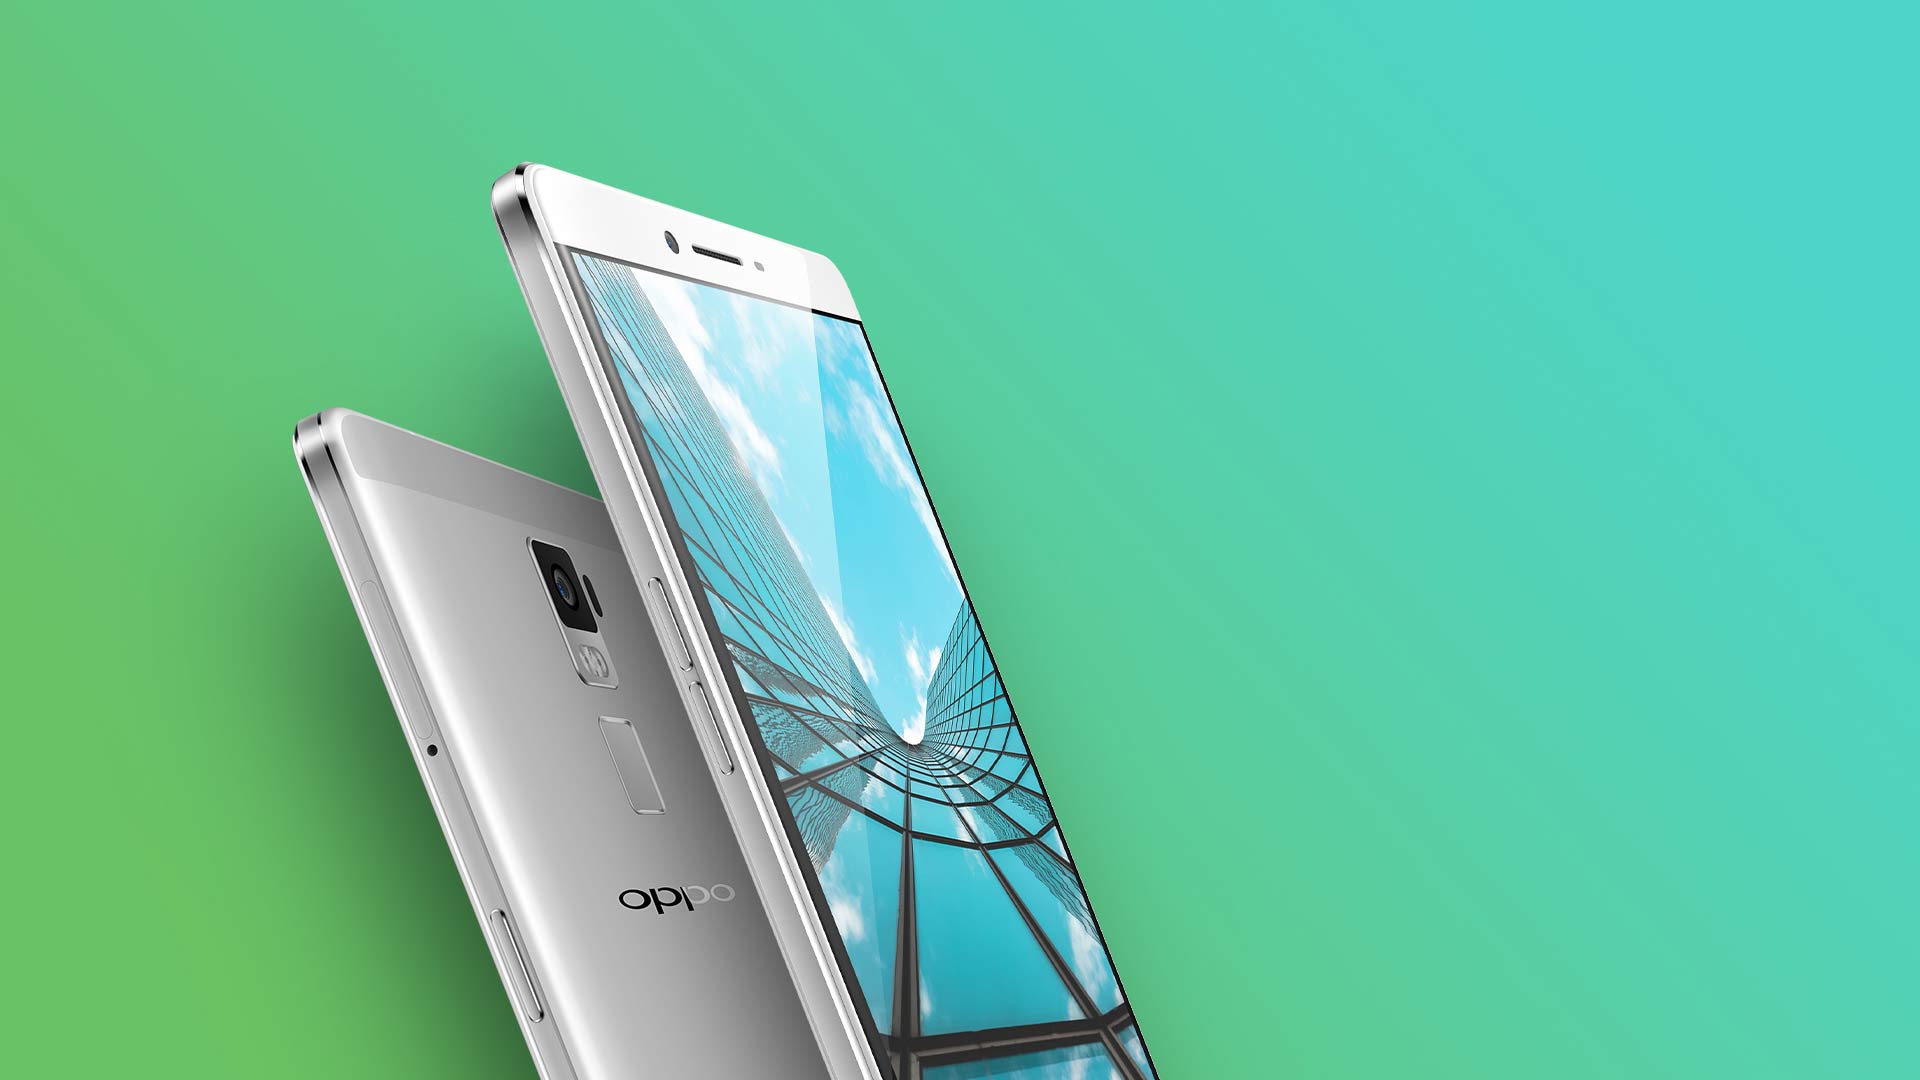 Oppo R7 and Oppo R7 Plus officially unveiled with full metal unibody design